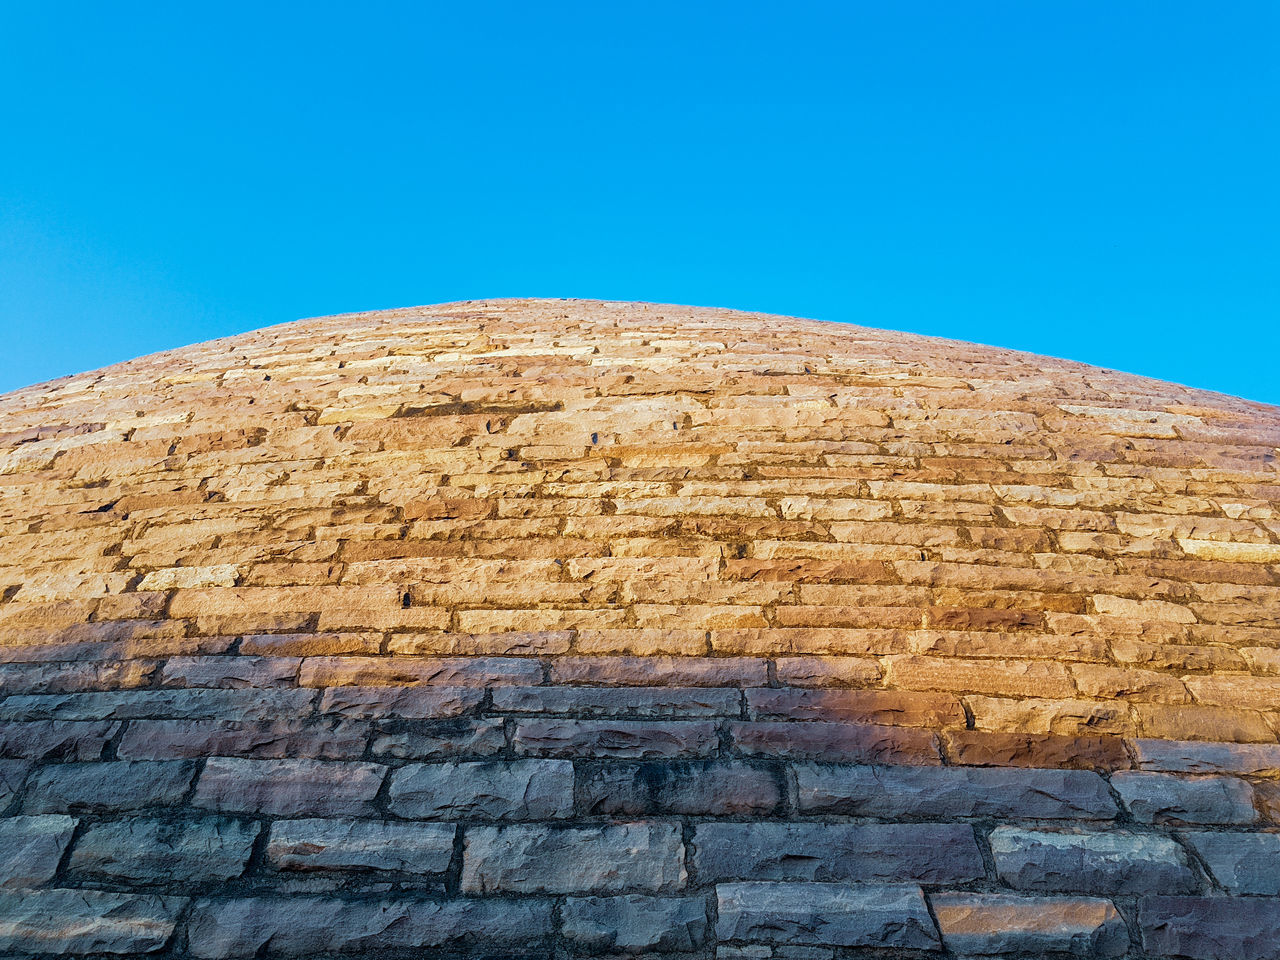 LOW ANGLE VIEW OF BRICK WALL AGAINST BLUE SKY